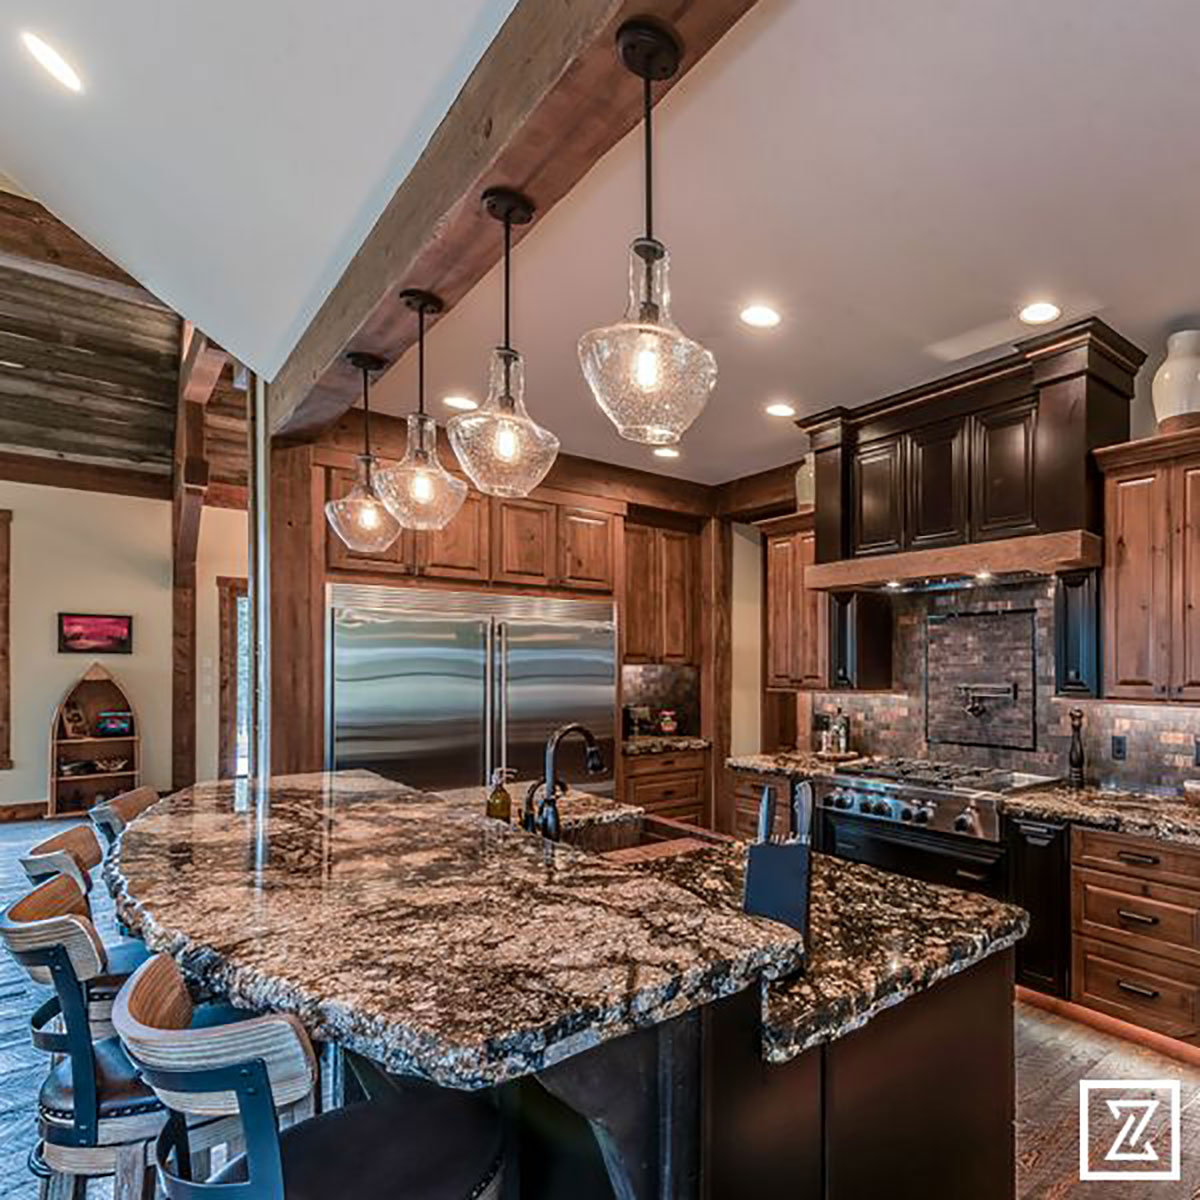 Well lit kitchen with hanging lights over the island with granite countertops and barstools around it